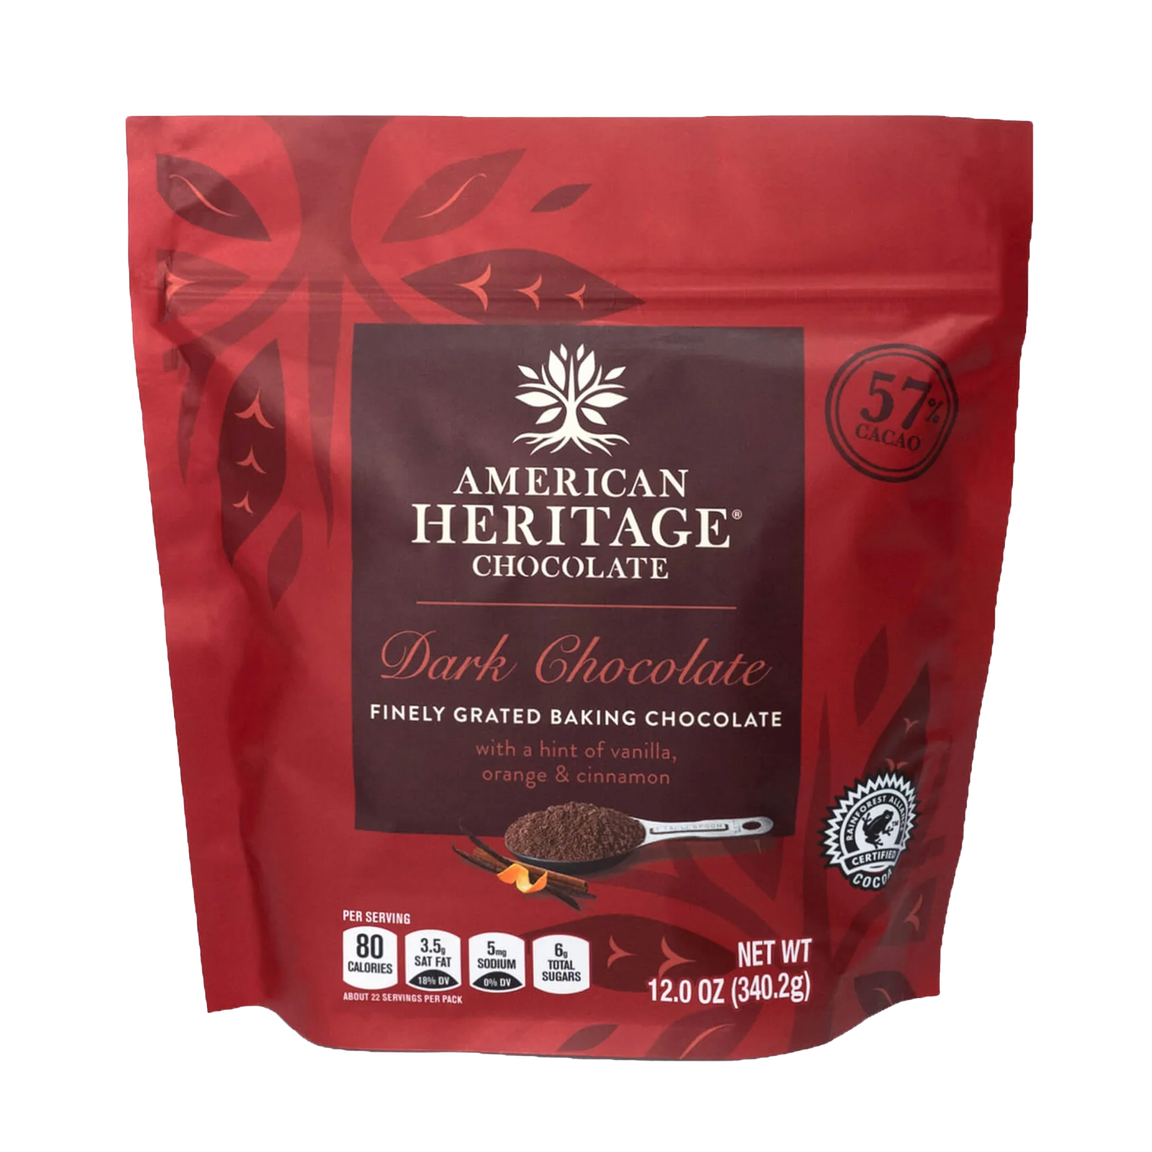 AMERICAN HERITAGE Chocolate Finely Grated Baking Chocolate 0